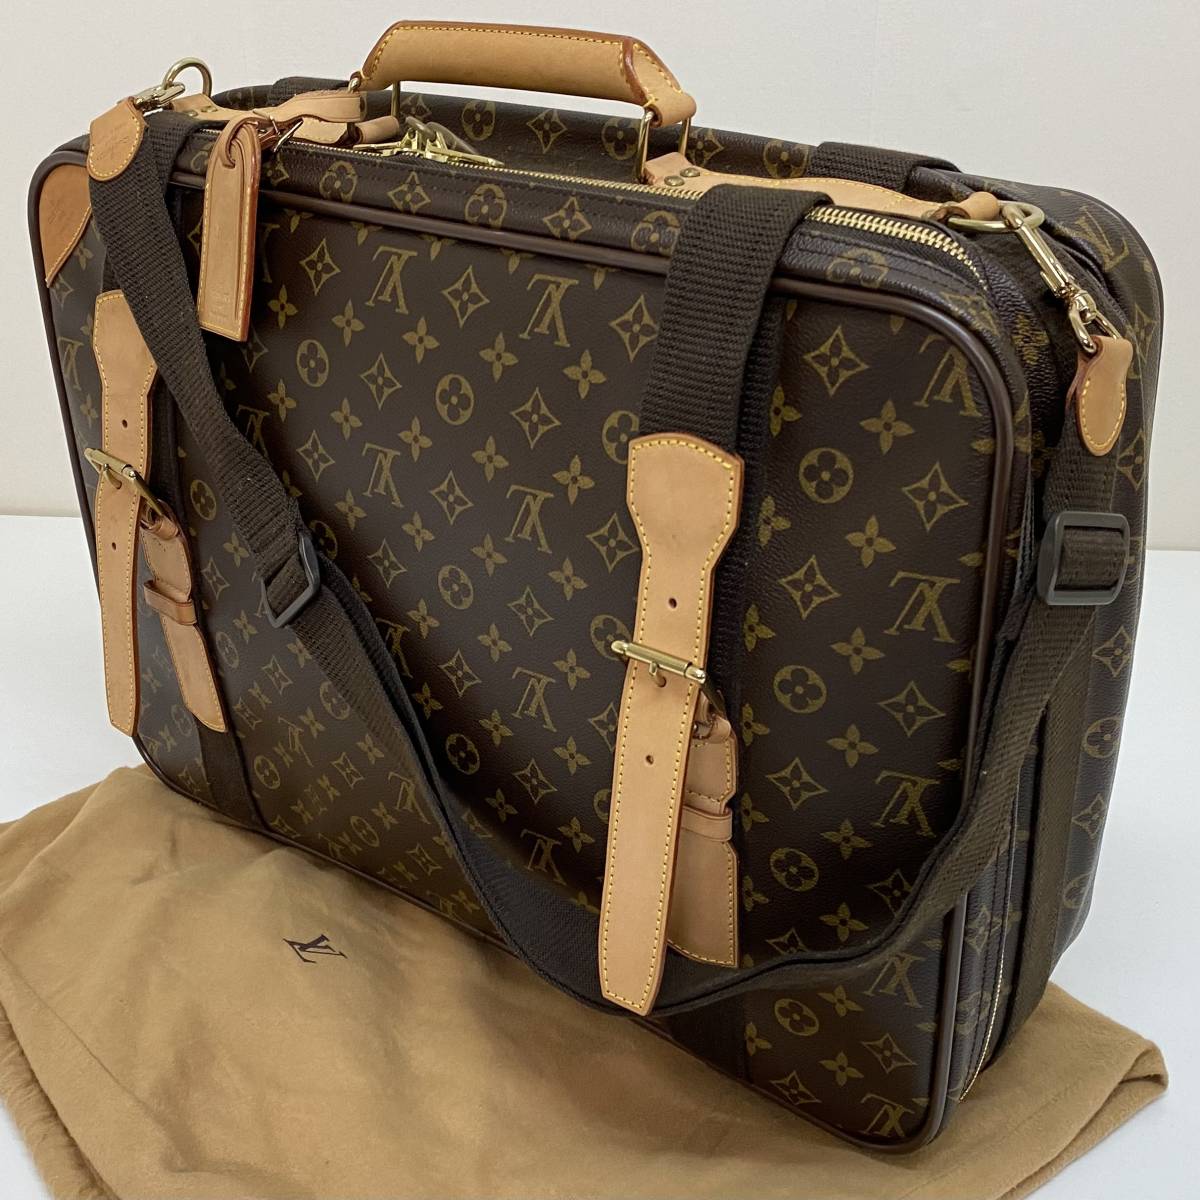 LOUIS VUITTON・ルイヴィトン・旅行用バッグ・キャリーバッグ